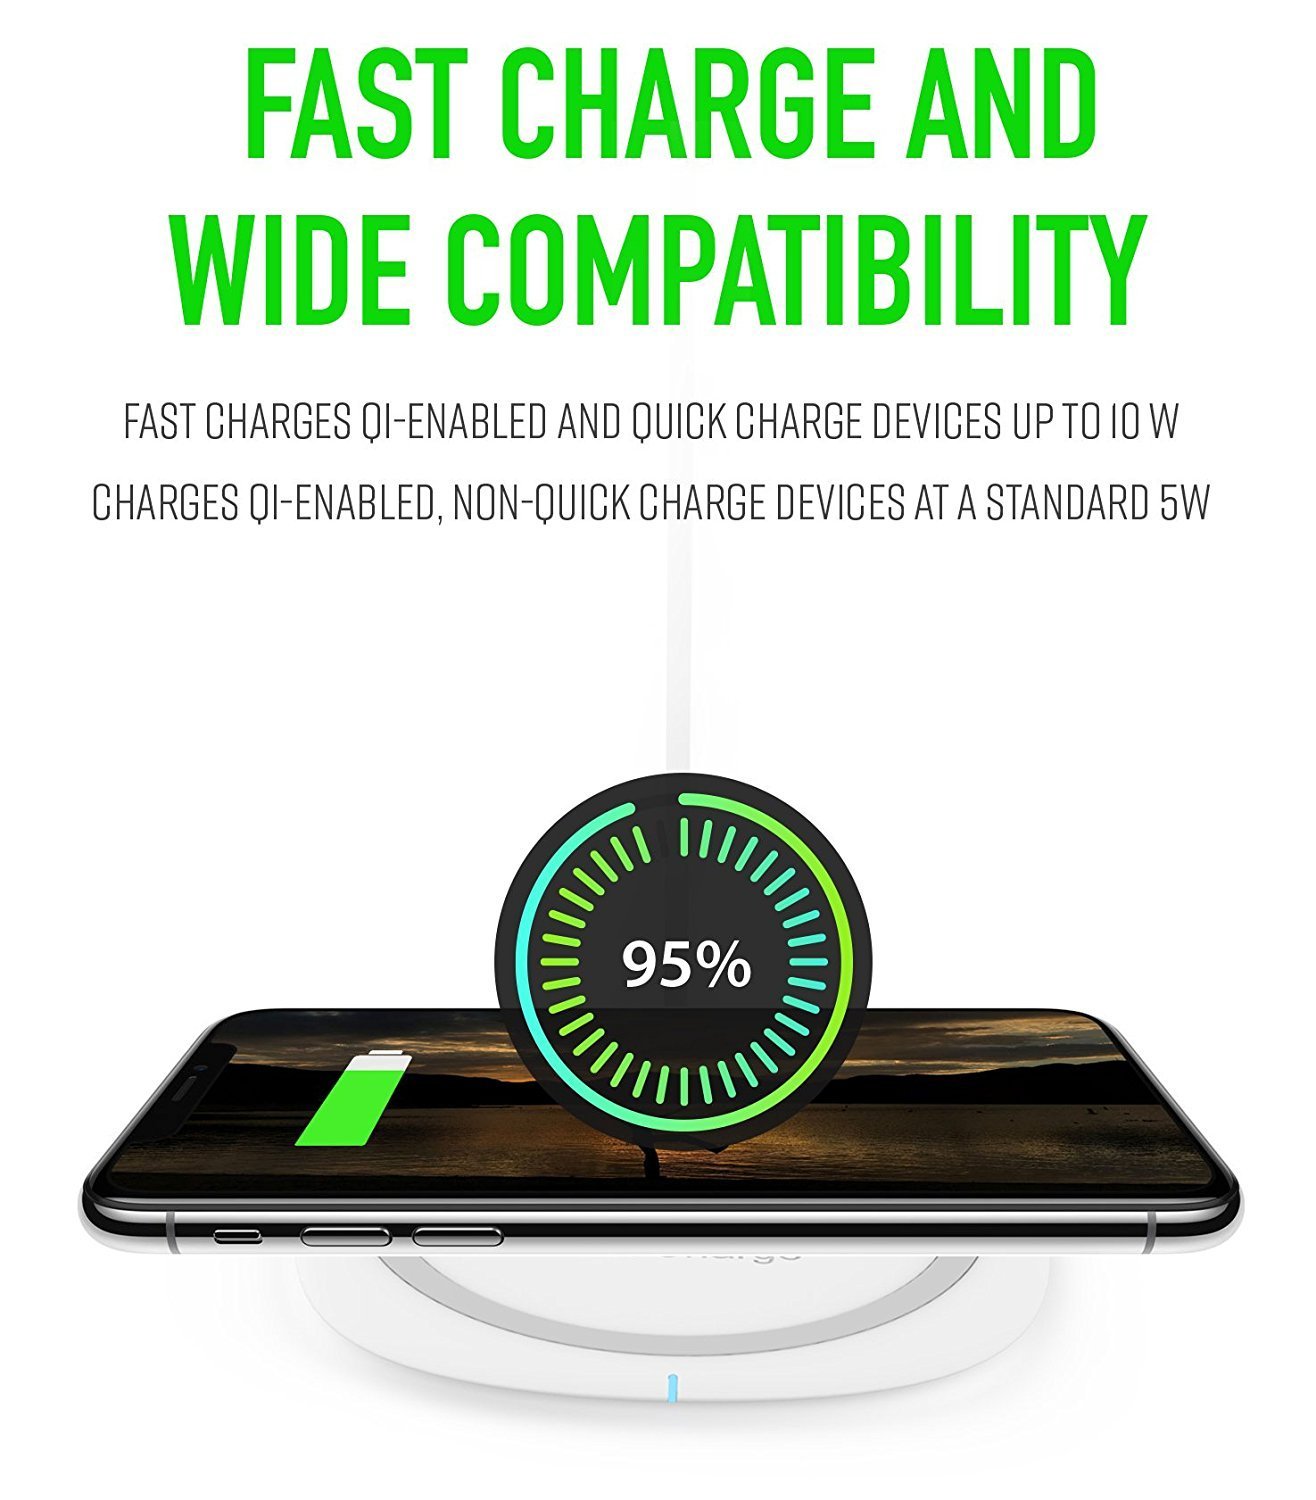 Fast Wireless Charger For Microsoft Lumia 950 XL Wireless Quick Charger Fast Charge 10W for iPhone X, iPhone 8, iPhone 8 Plus,Samsung Note 8, S6 Edge +, S7, S7 Edge, S8 and S8 Plus, etc. by Ixir - image 2 of 8